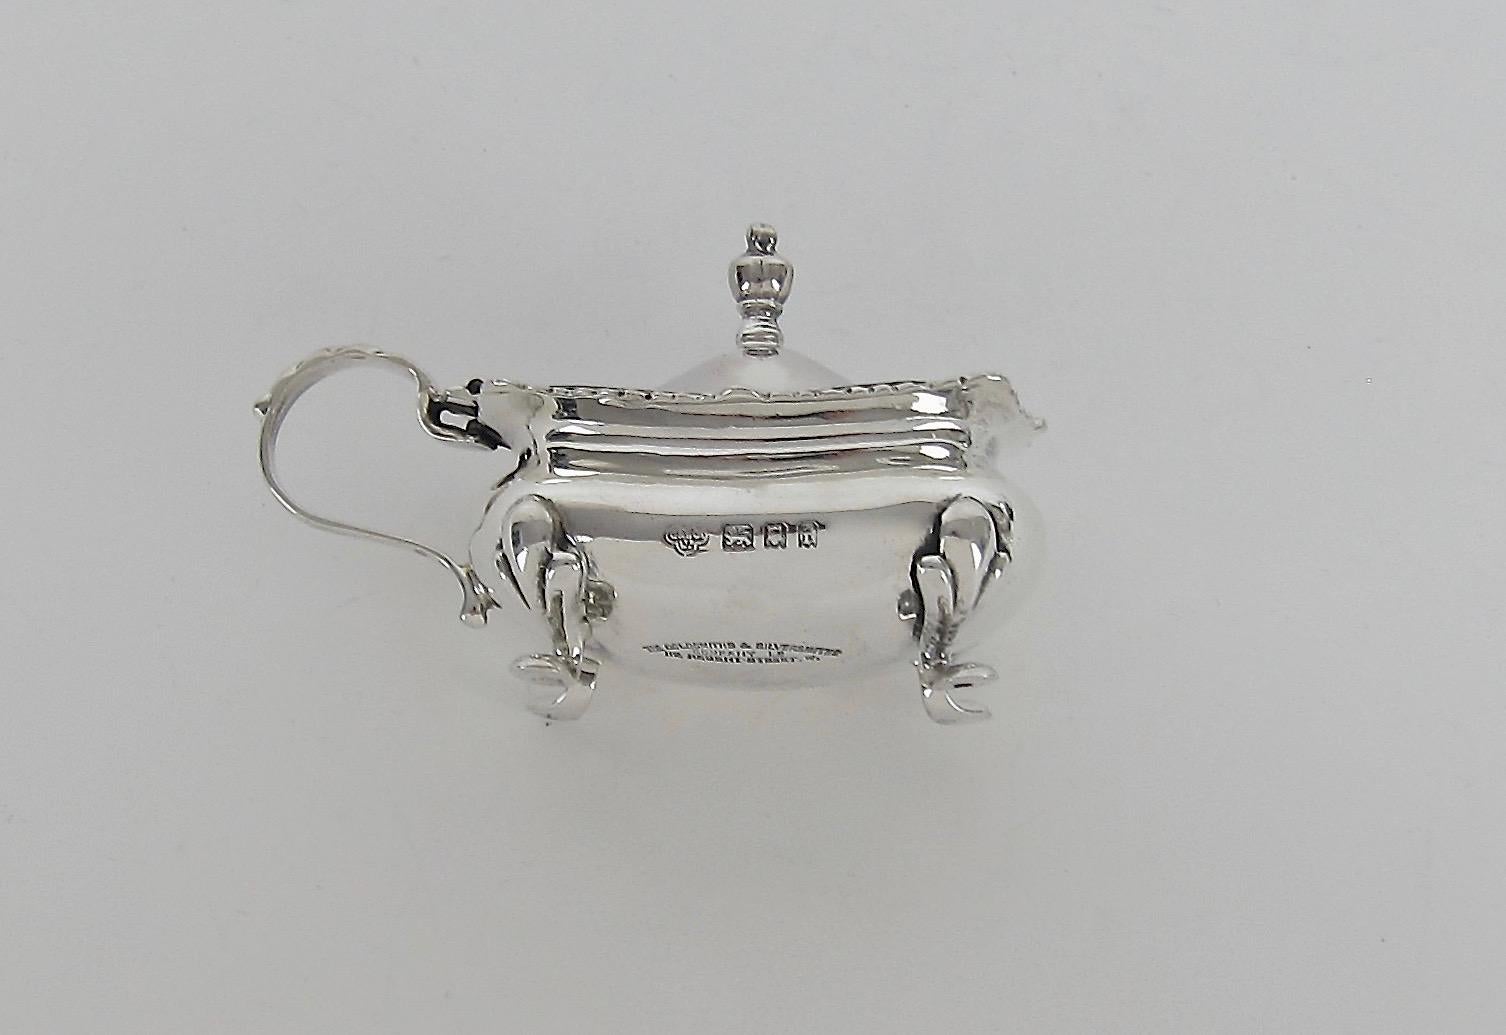 Georgian Antique Sterling Silver Mustard Pots from the Goldsmiths & Silversmiths Co Ltd